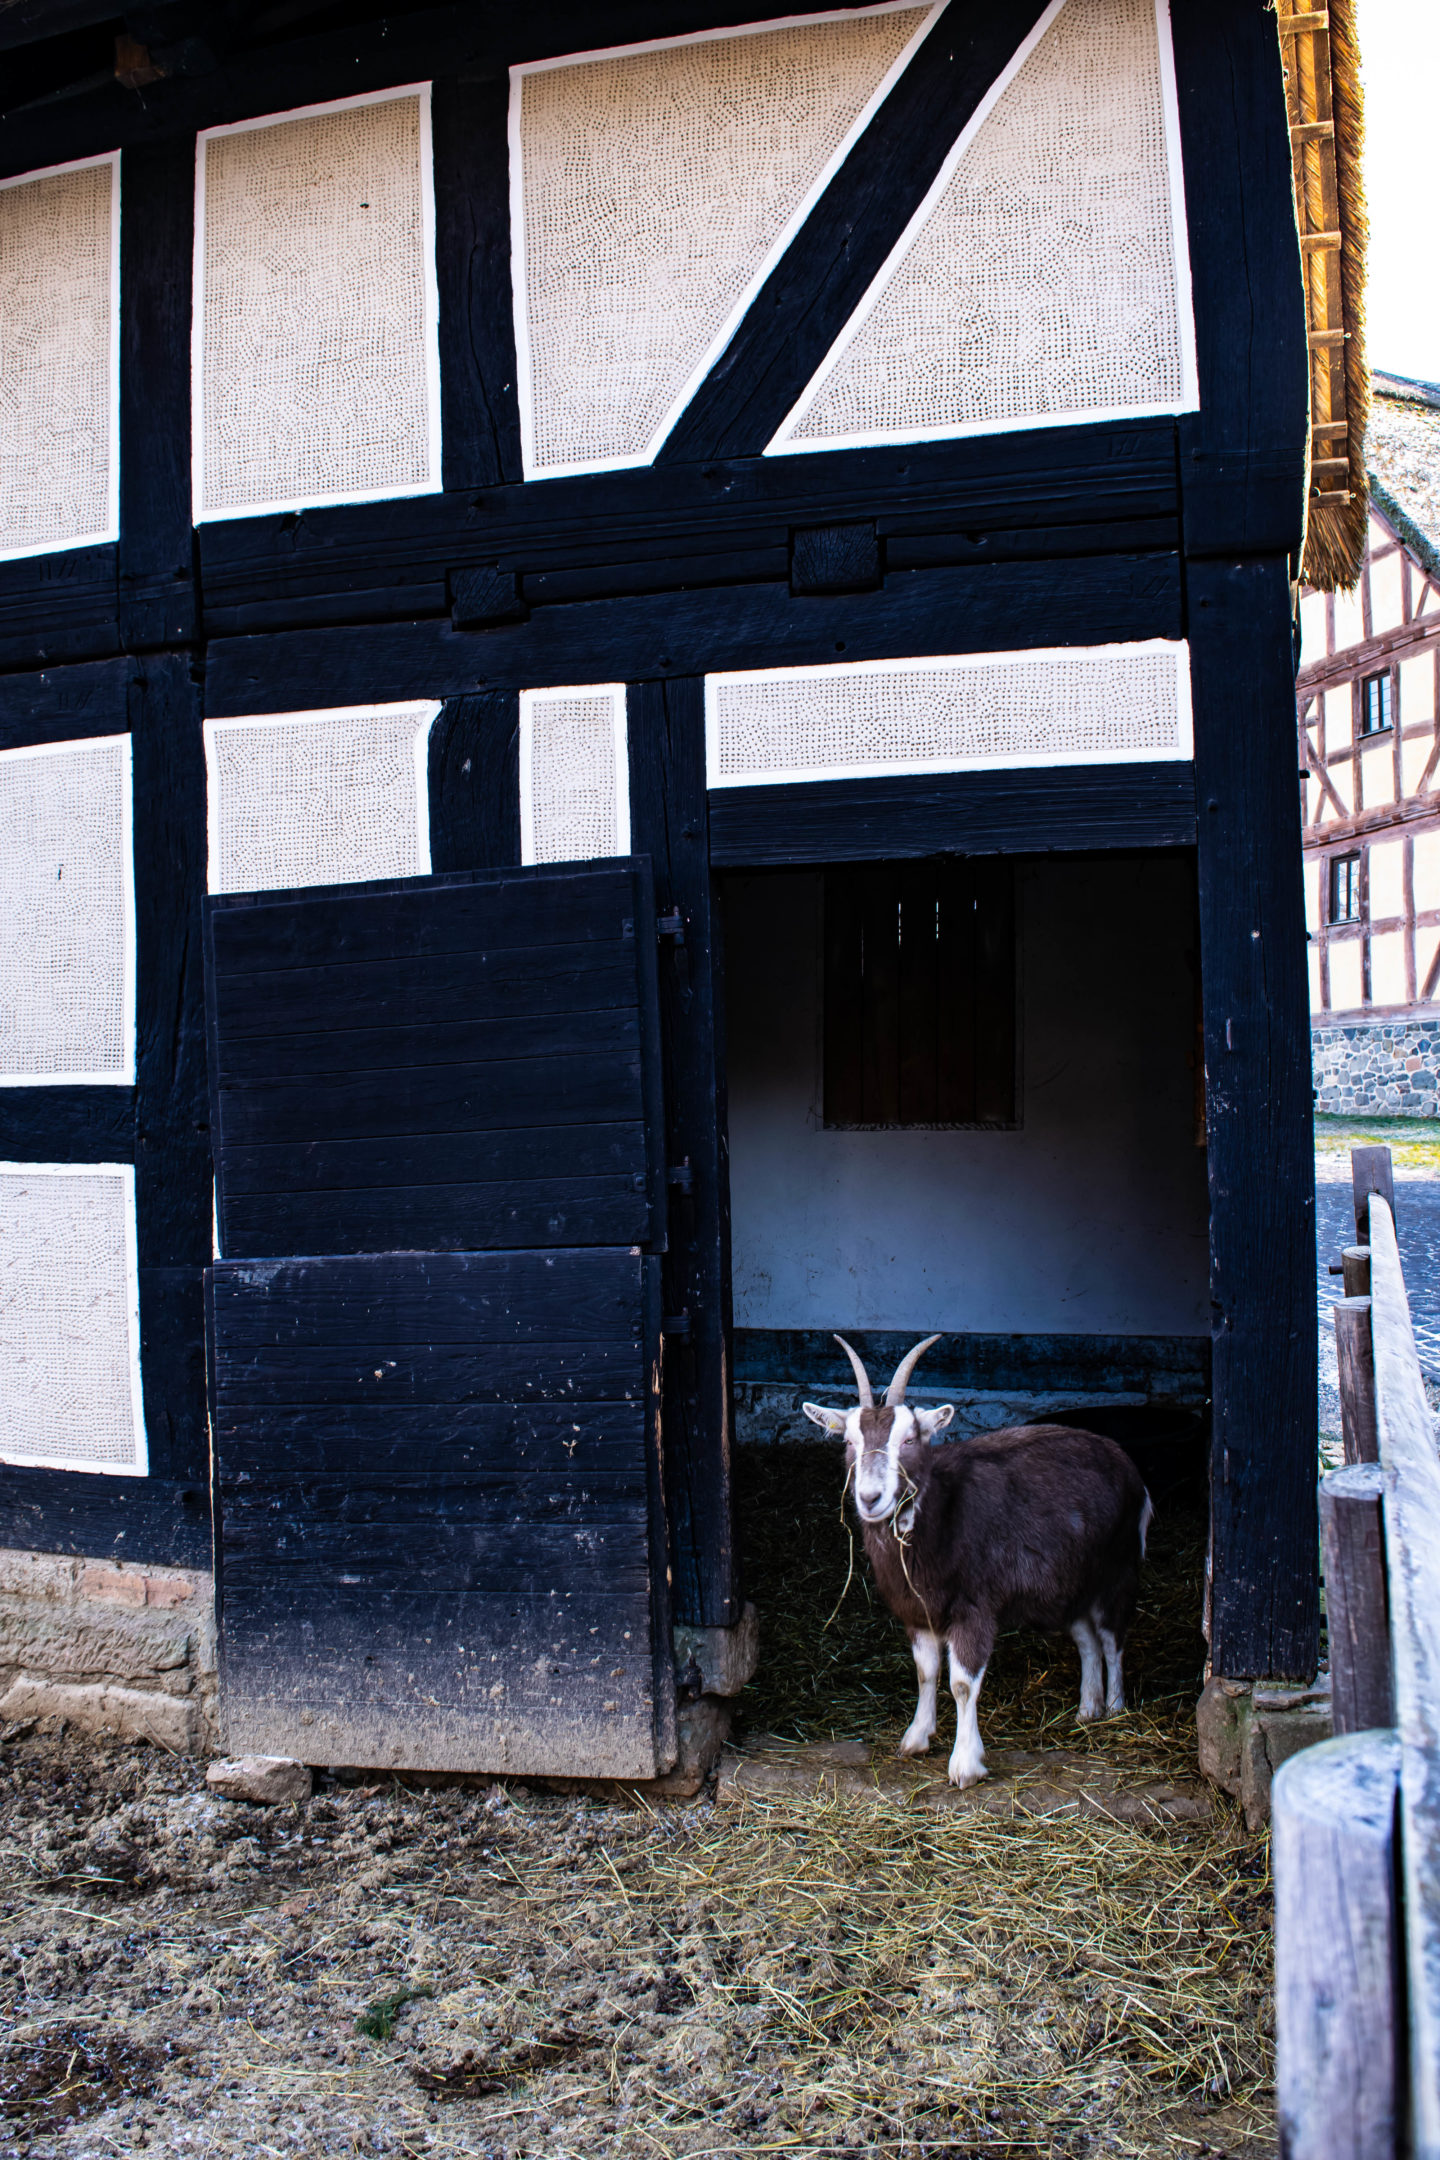 A Thuringian goat completely uninterested in getting its photo taken.